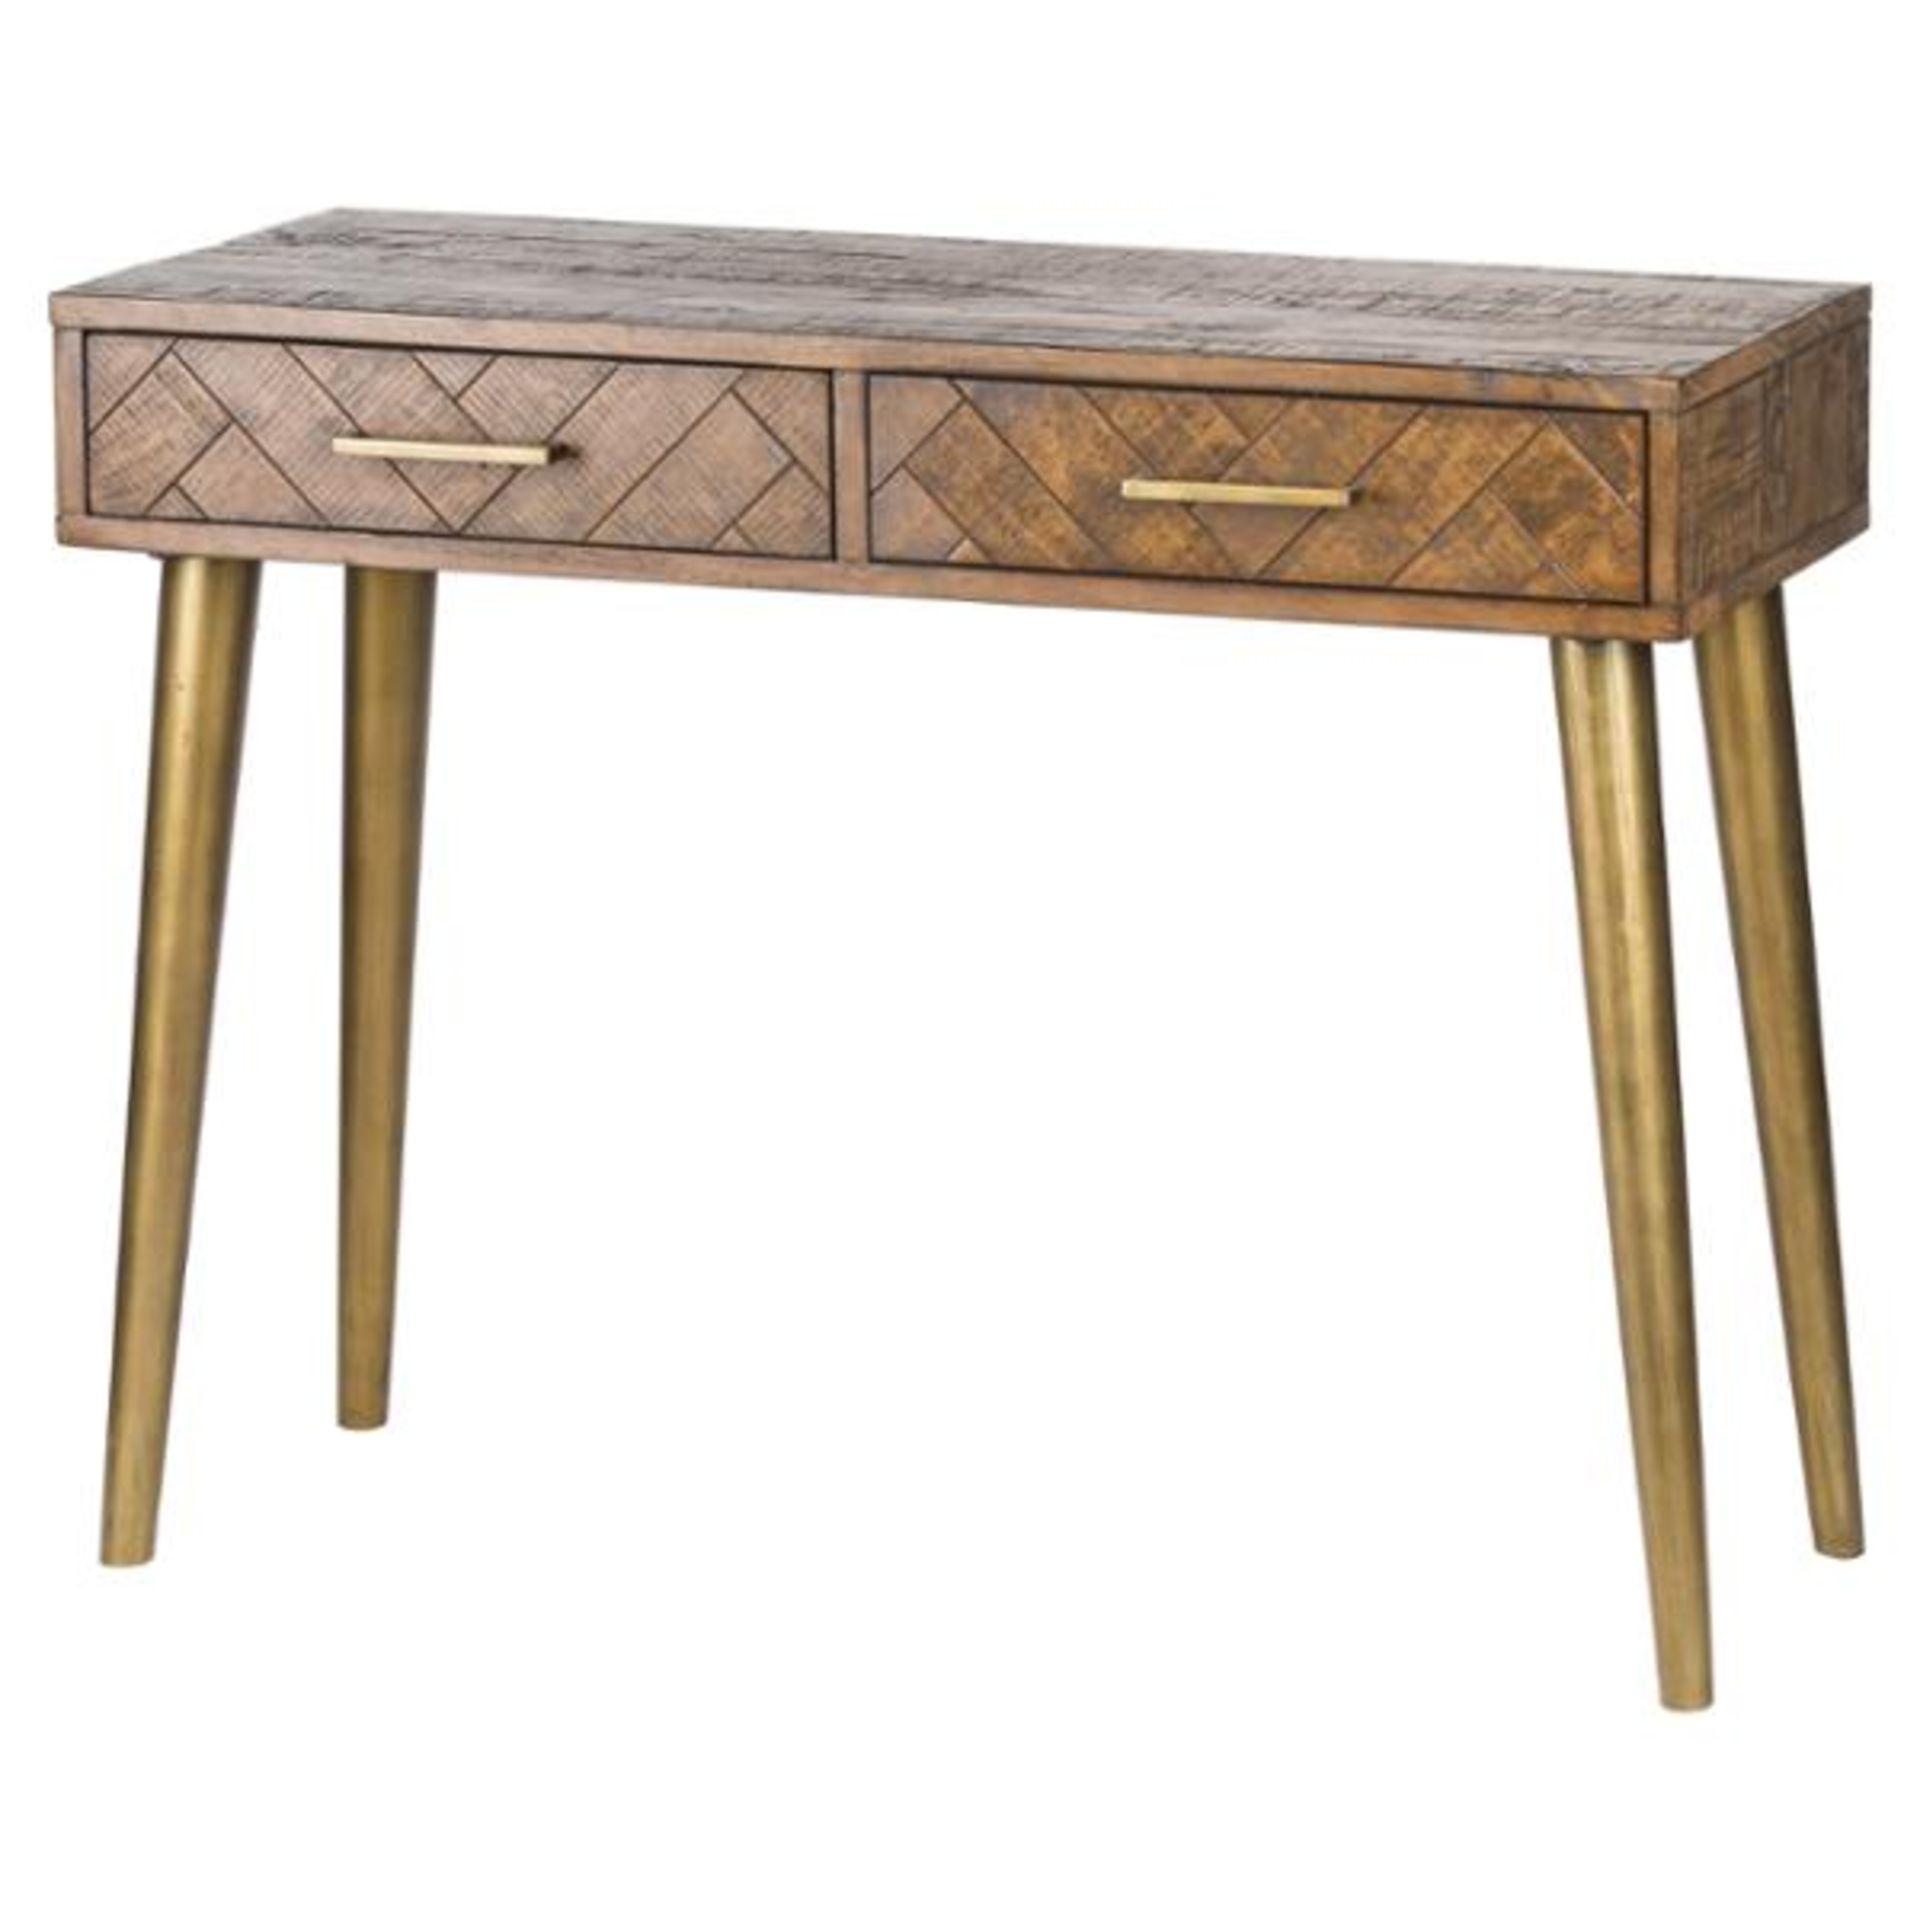 Havana Gold Console Table. Part Of A Capsule Collection Pieces Designed To Deliver A Sophisticated - Bild 2 aus 2